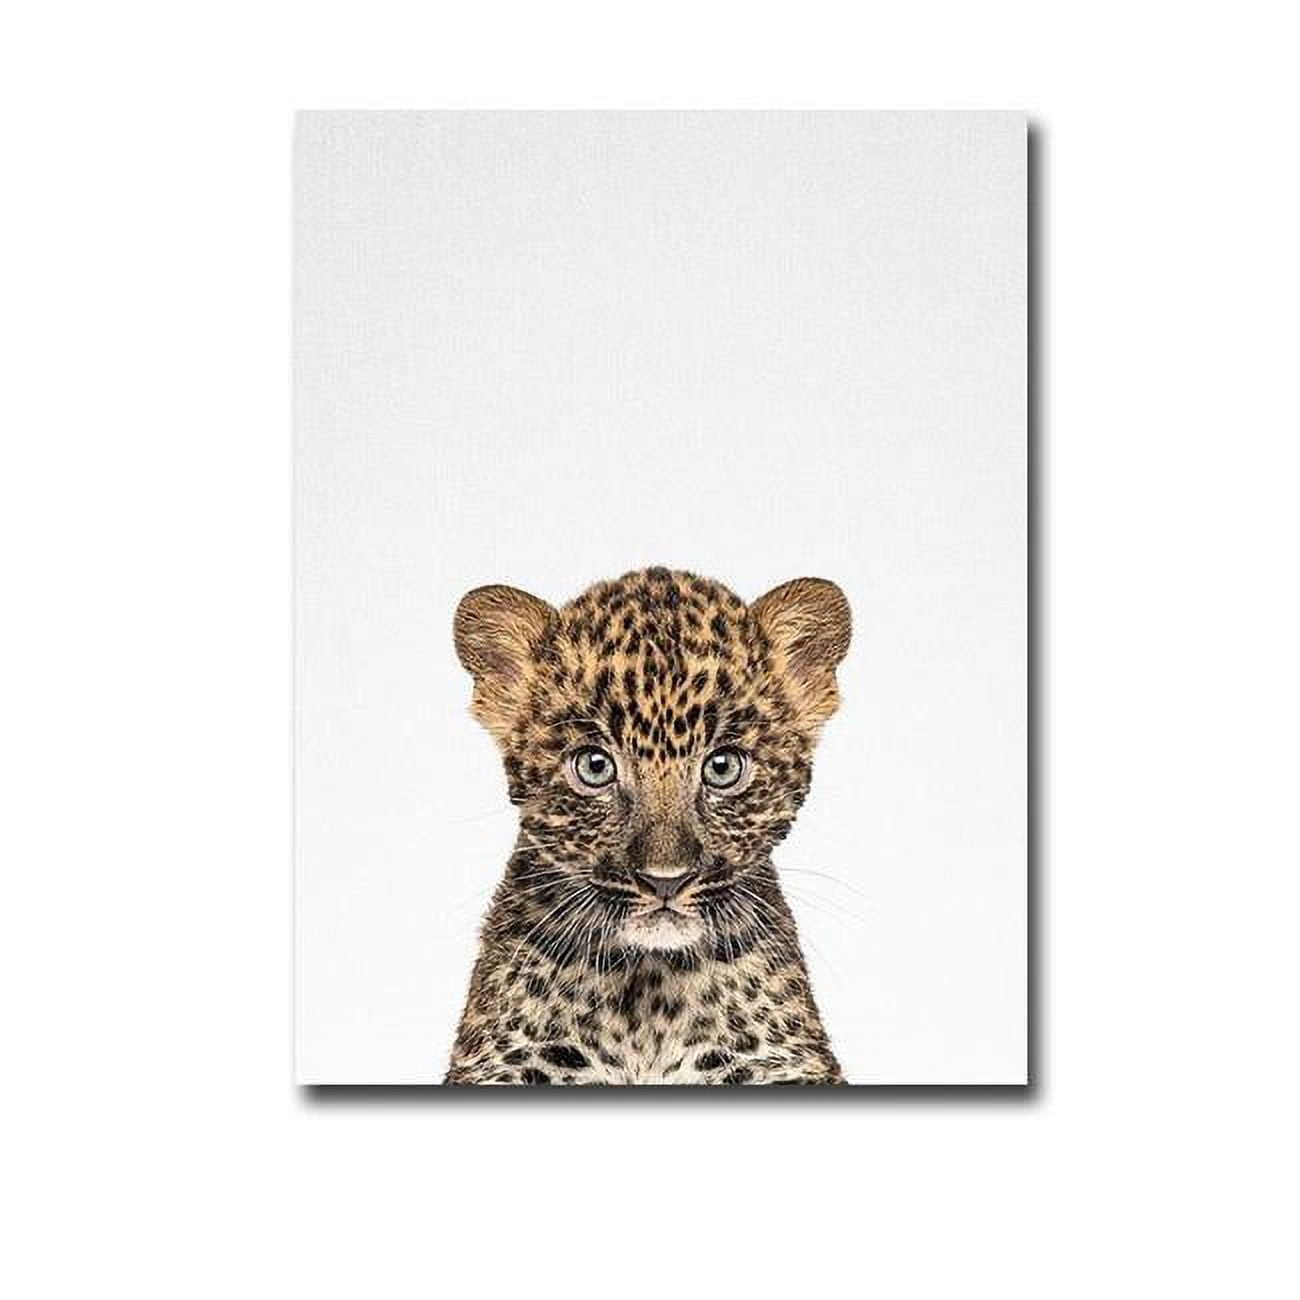 1216w4972ig Leopard By Tai Prints Premium Gallery-wrapped Canvas Giclee Art - 12 X 16 X 1.5 In.